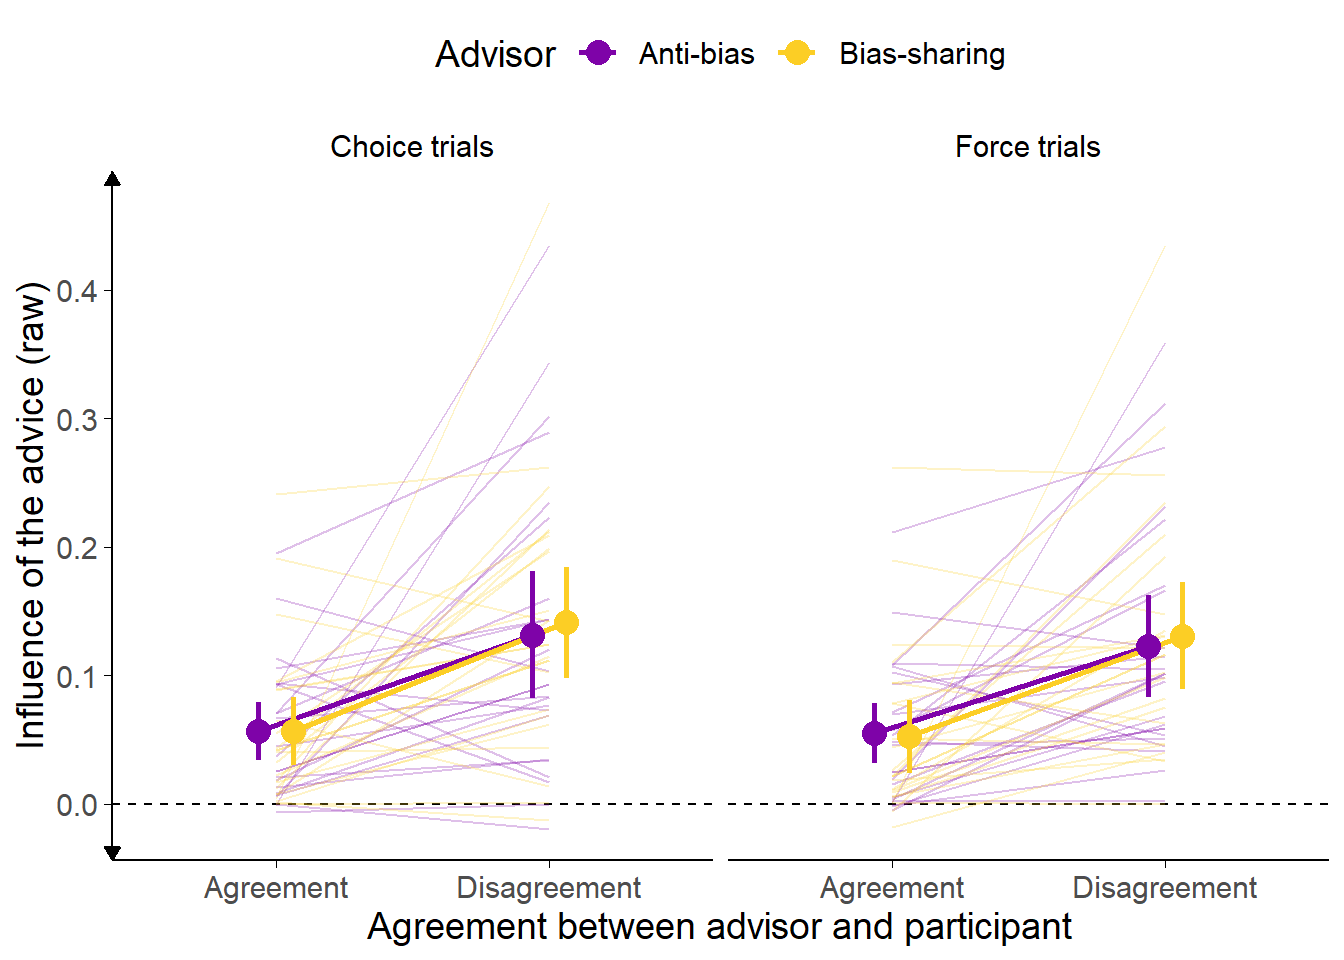 Advisor influence for Lab experiment.<br/> Influence of advice from each advisor by advisor, agreement, and trial type. Faint lines and indicate data from individual participants, while the dots indicate the mean proportion across all participants. Error bars give 95\% confidence intervals.<br/> Note: vertical axis is truncated to show group differences more clearly, the theoretical maximum influence given the scale is 110. The minimum is -110 as shown.